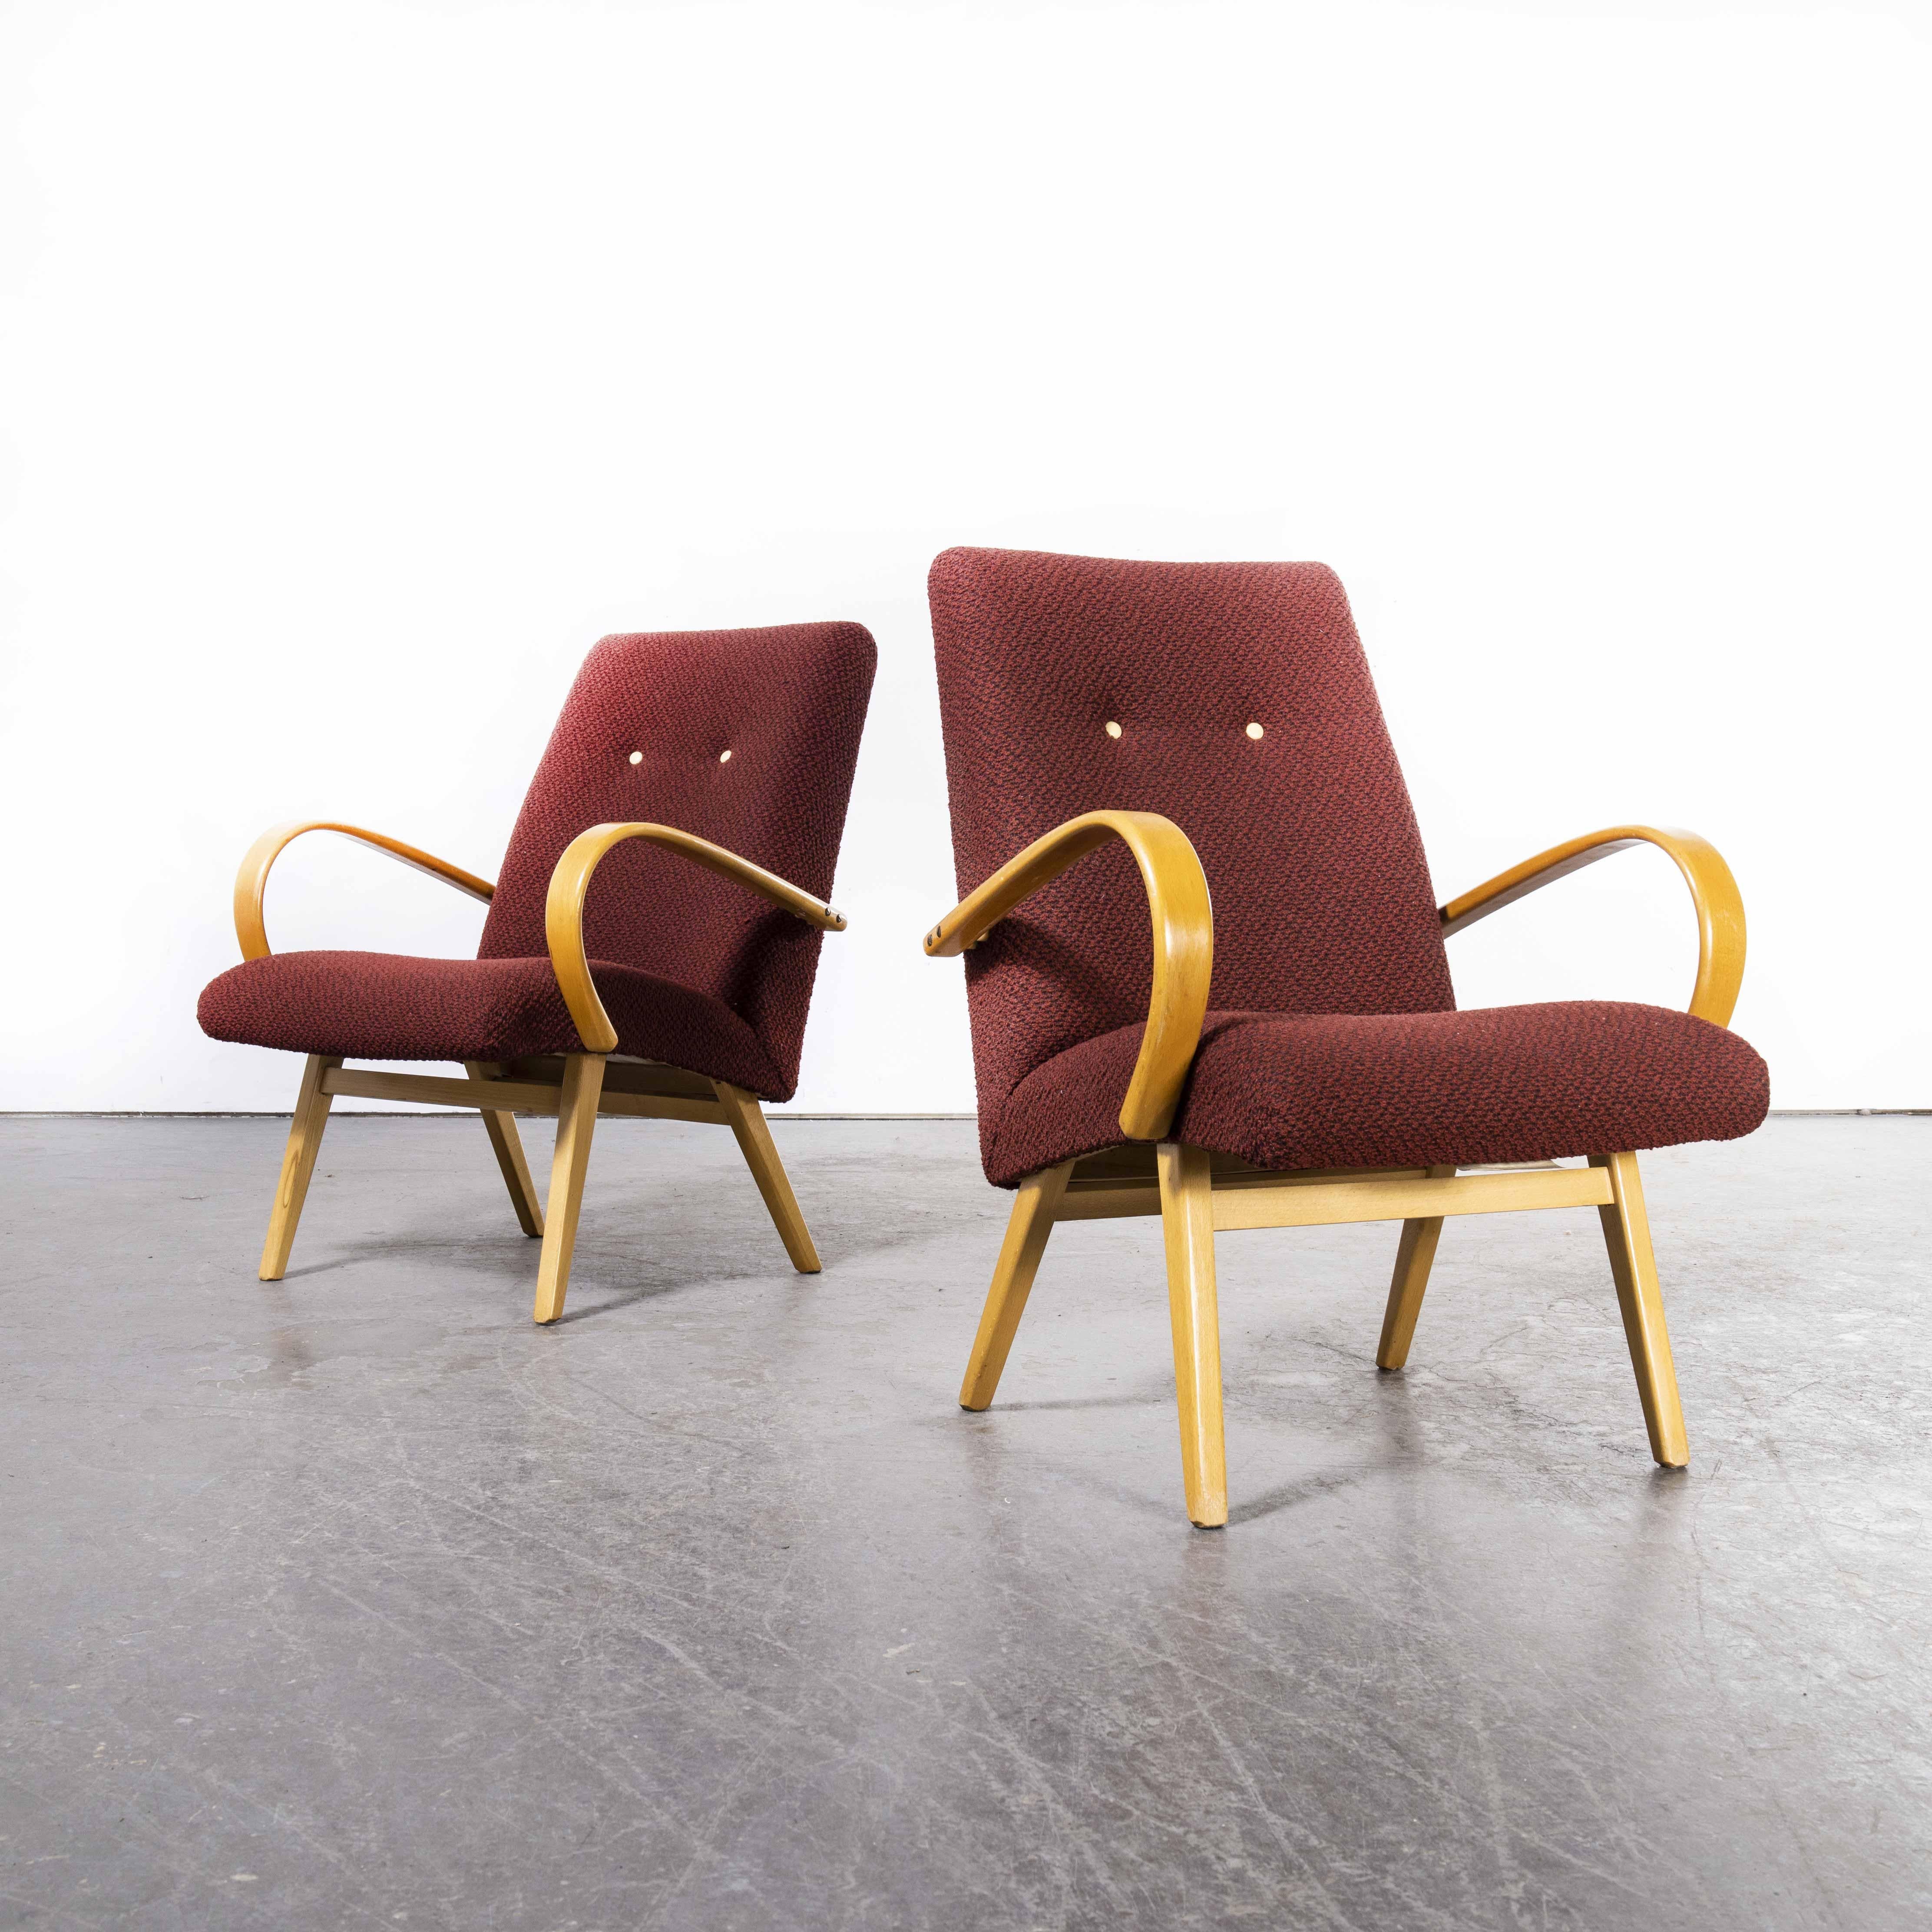 1960’s original pair of red armchairs – Produced By Up Zavody
1960’s original pair of red armchairs – Produced By Up Zavody. These chairs were produced by the Czech firm Up Zavody, produced in the sixties and these chairs retain their original